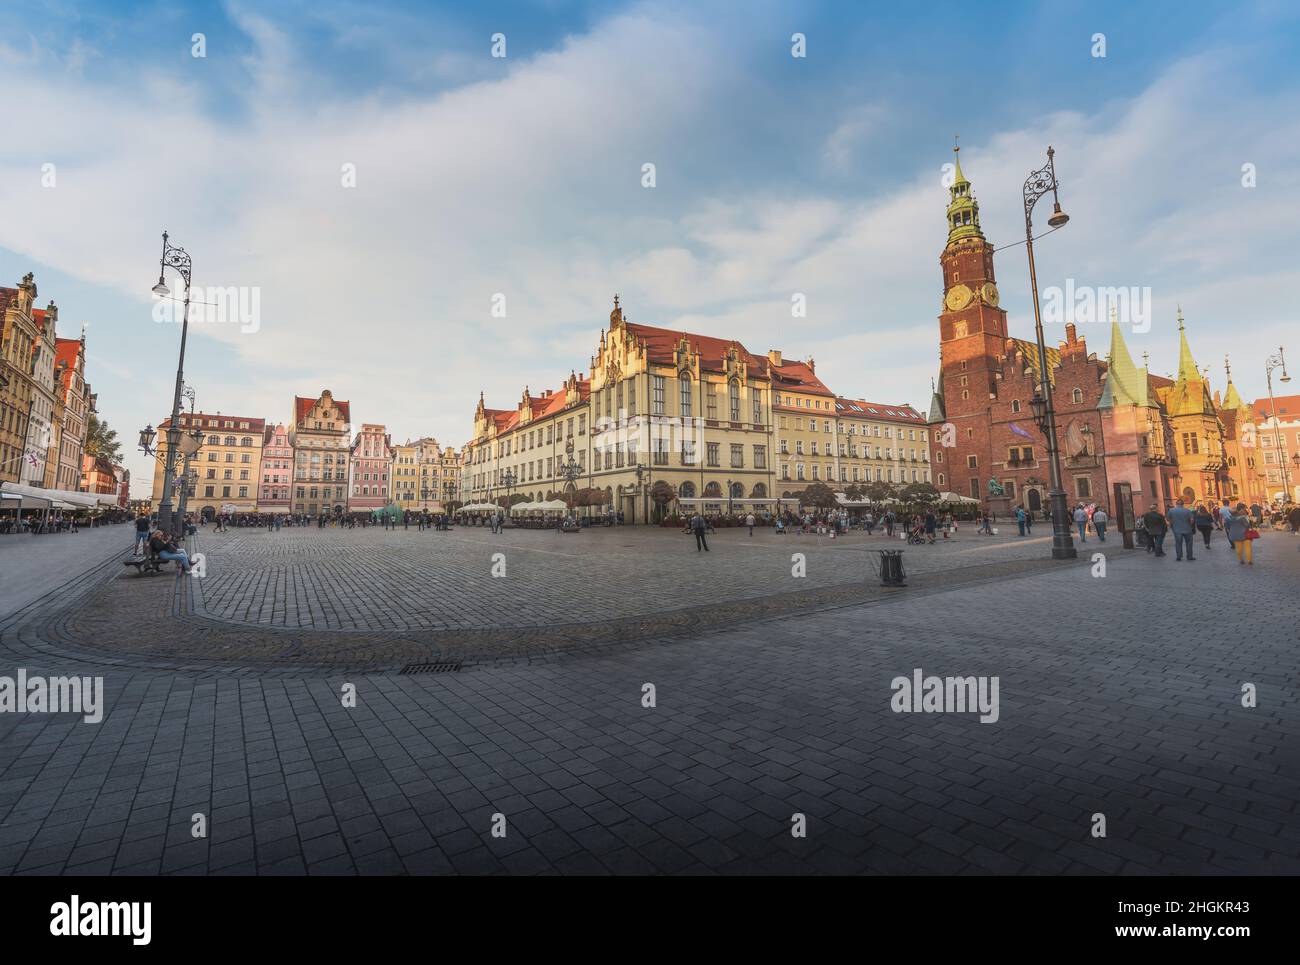 Panoramic view of Market Square with New and Old Town Hall - Wroclaw, Poland Stock Photo